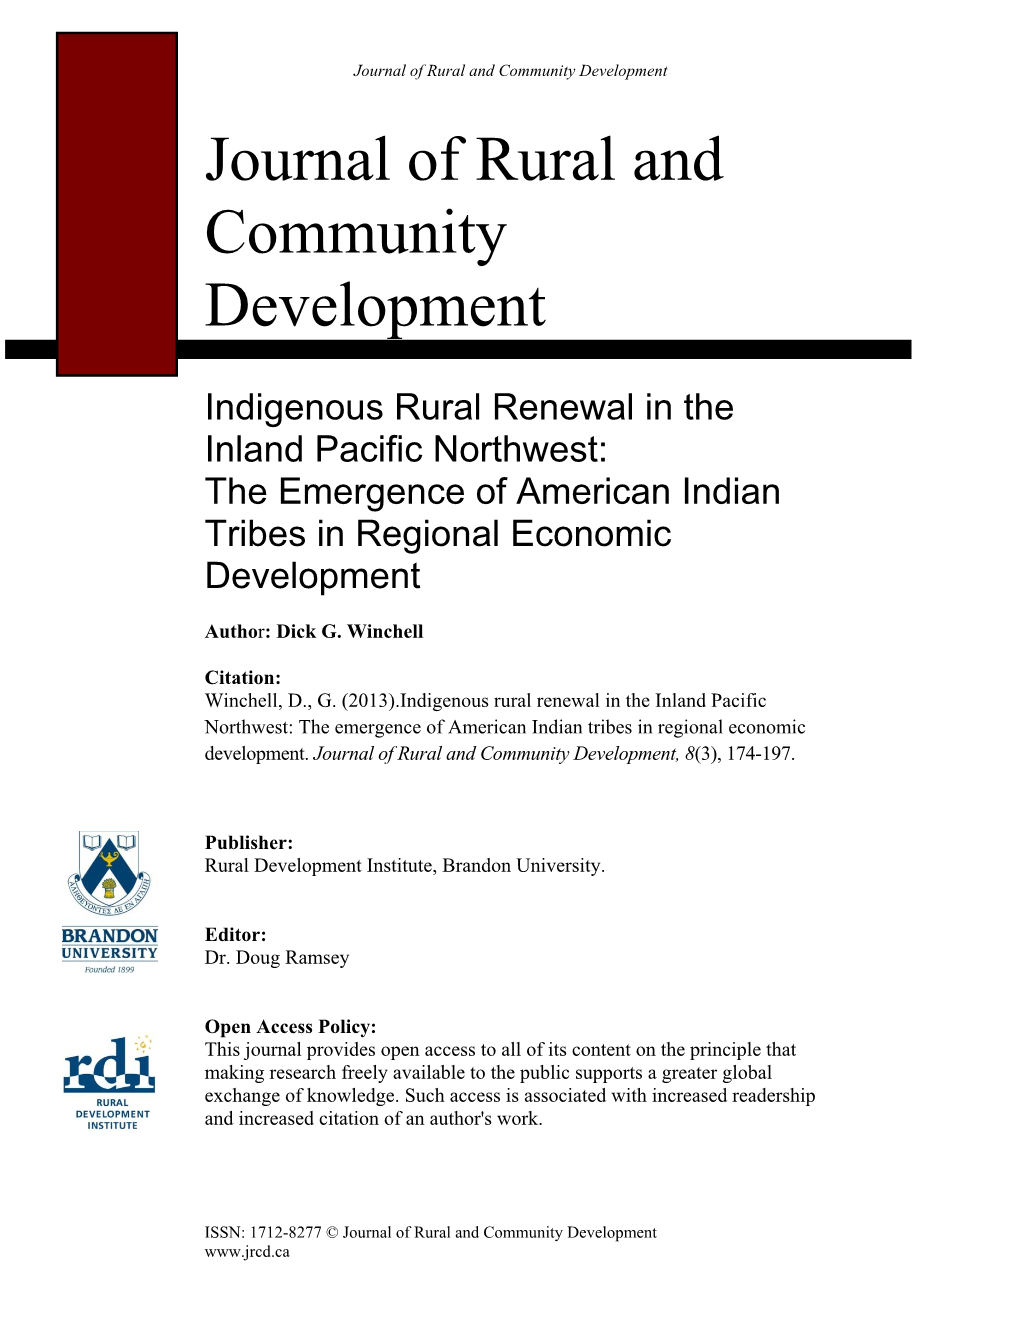 The Emergence of American Indian Tribes in Regional Economic Development